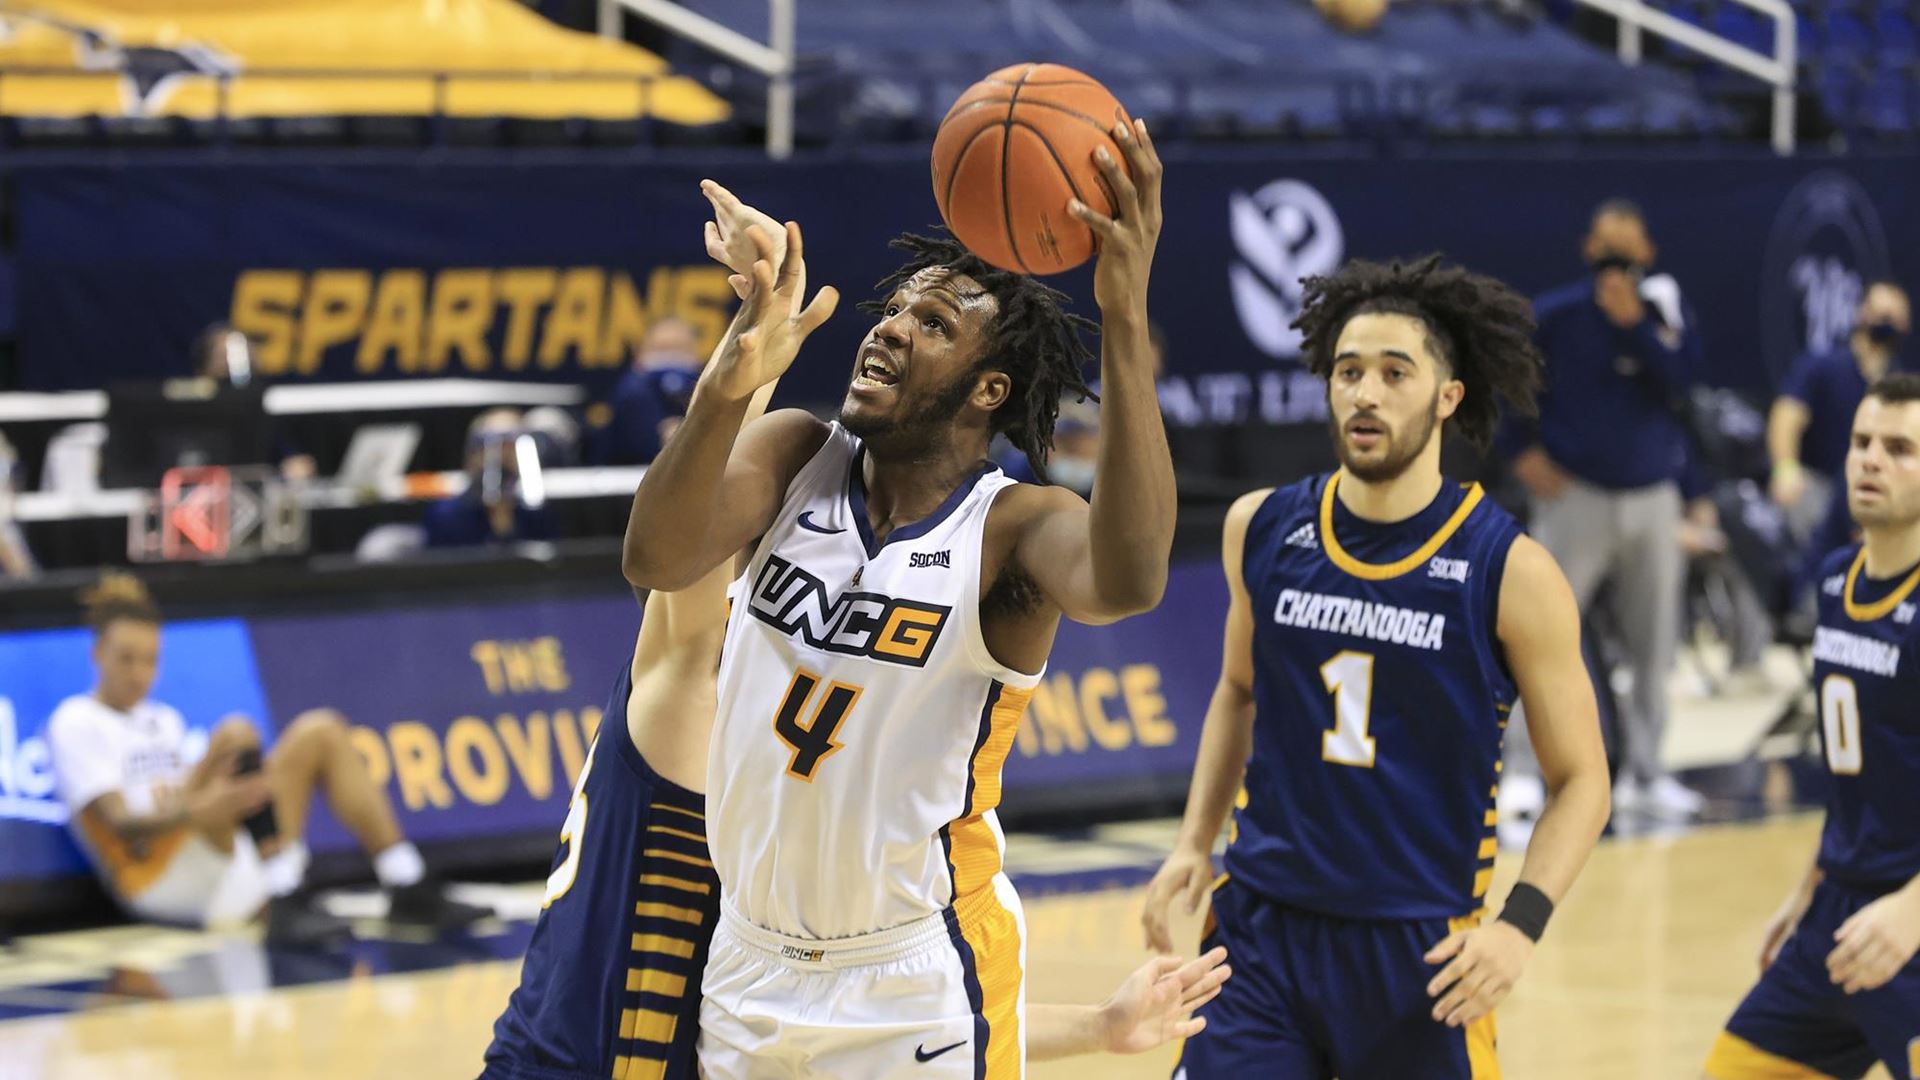 Mo Abdulsalam led UNCG in rebounds in 2020-21